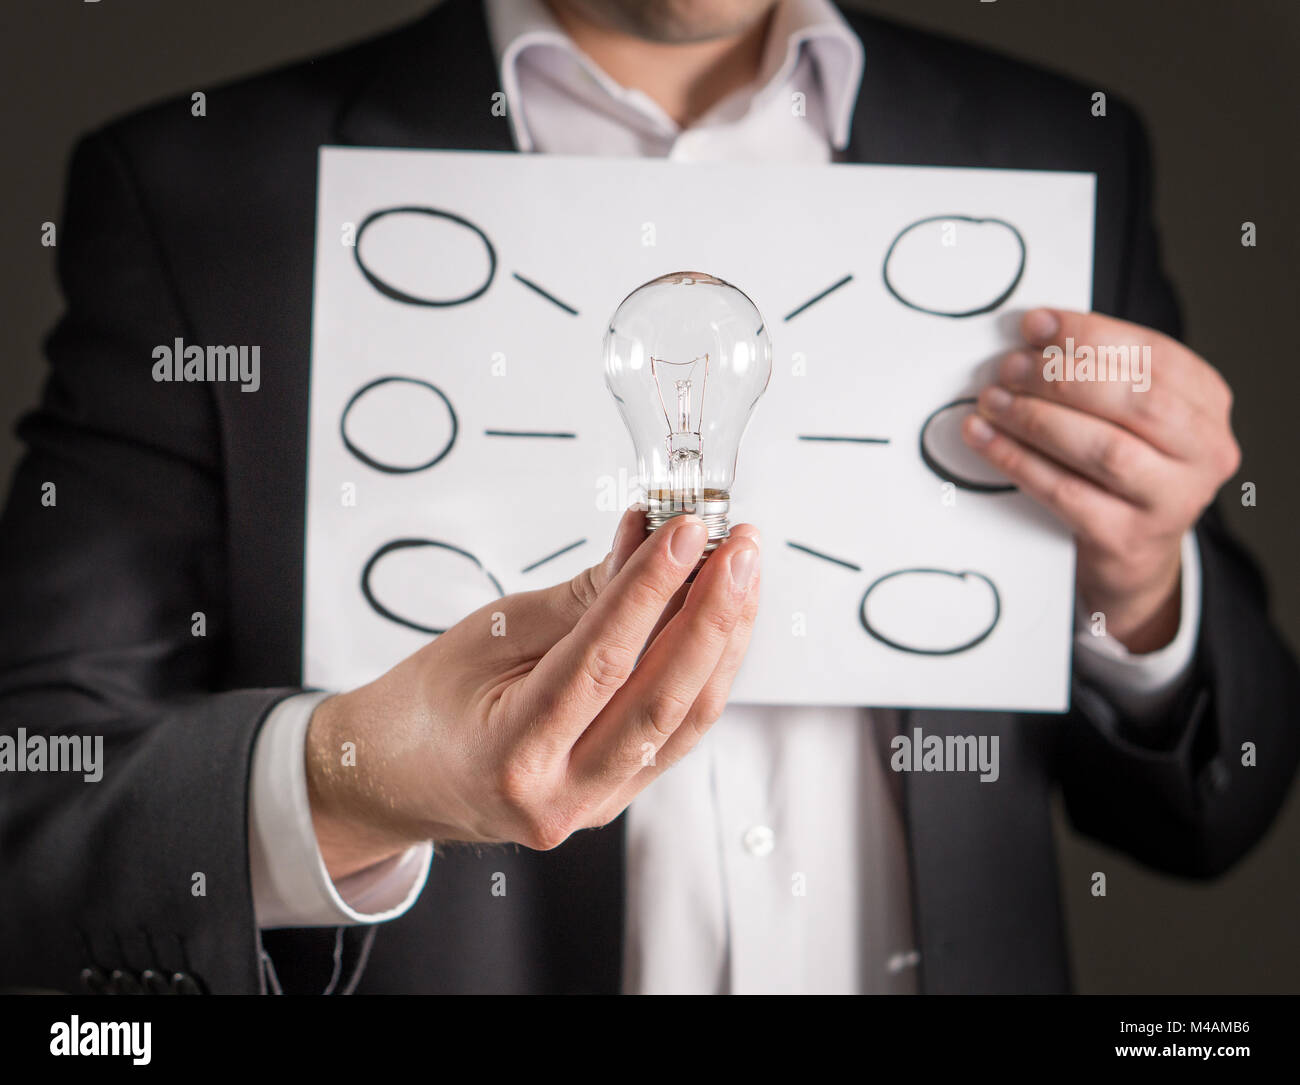 Mind map, new idea, innovation and brainstorming concept. Business man in a suit holding light bulb and a mindmap. Stock Photo